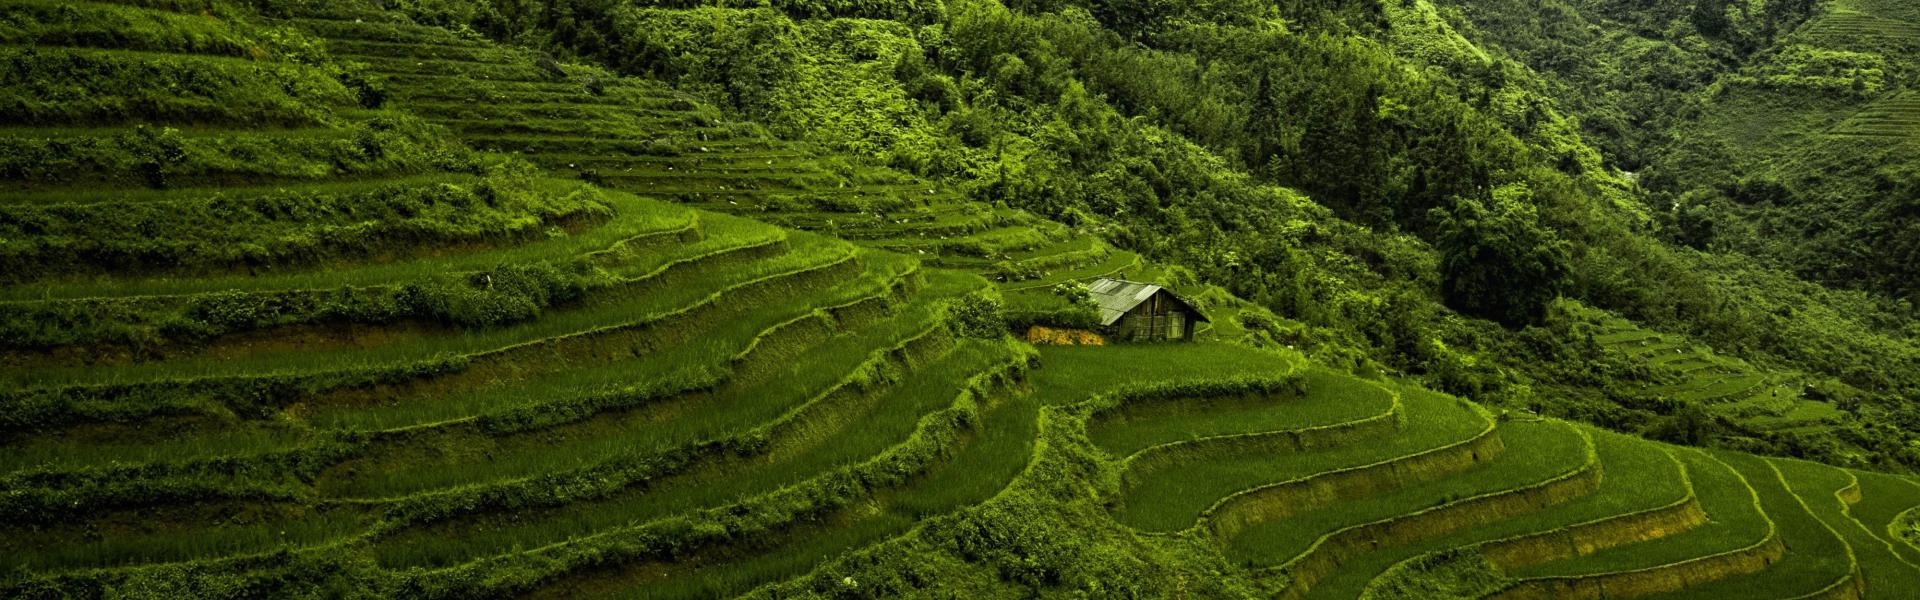 View of terraces carved into the mountains in Vietnam (photo: Ian Slater/Pexels)